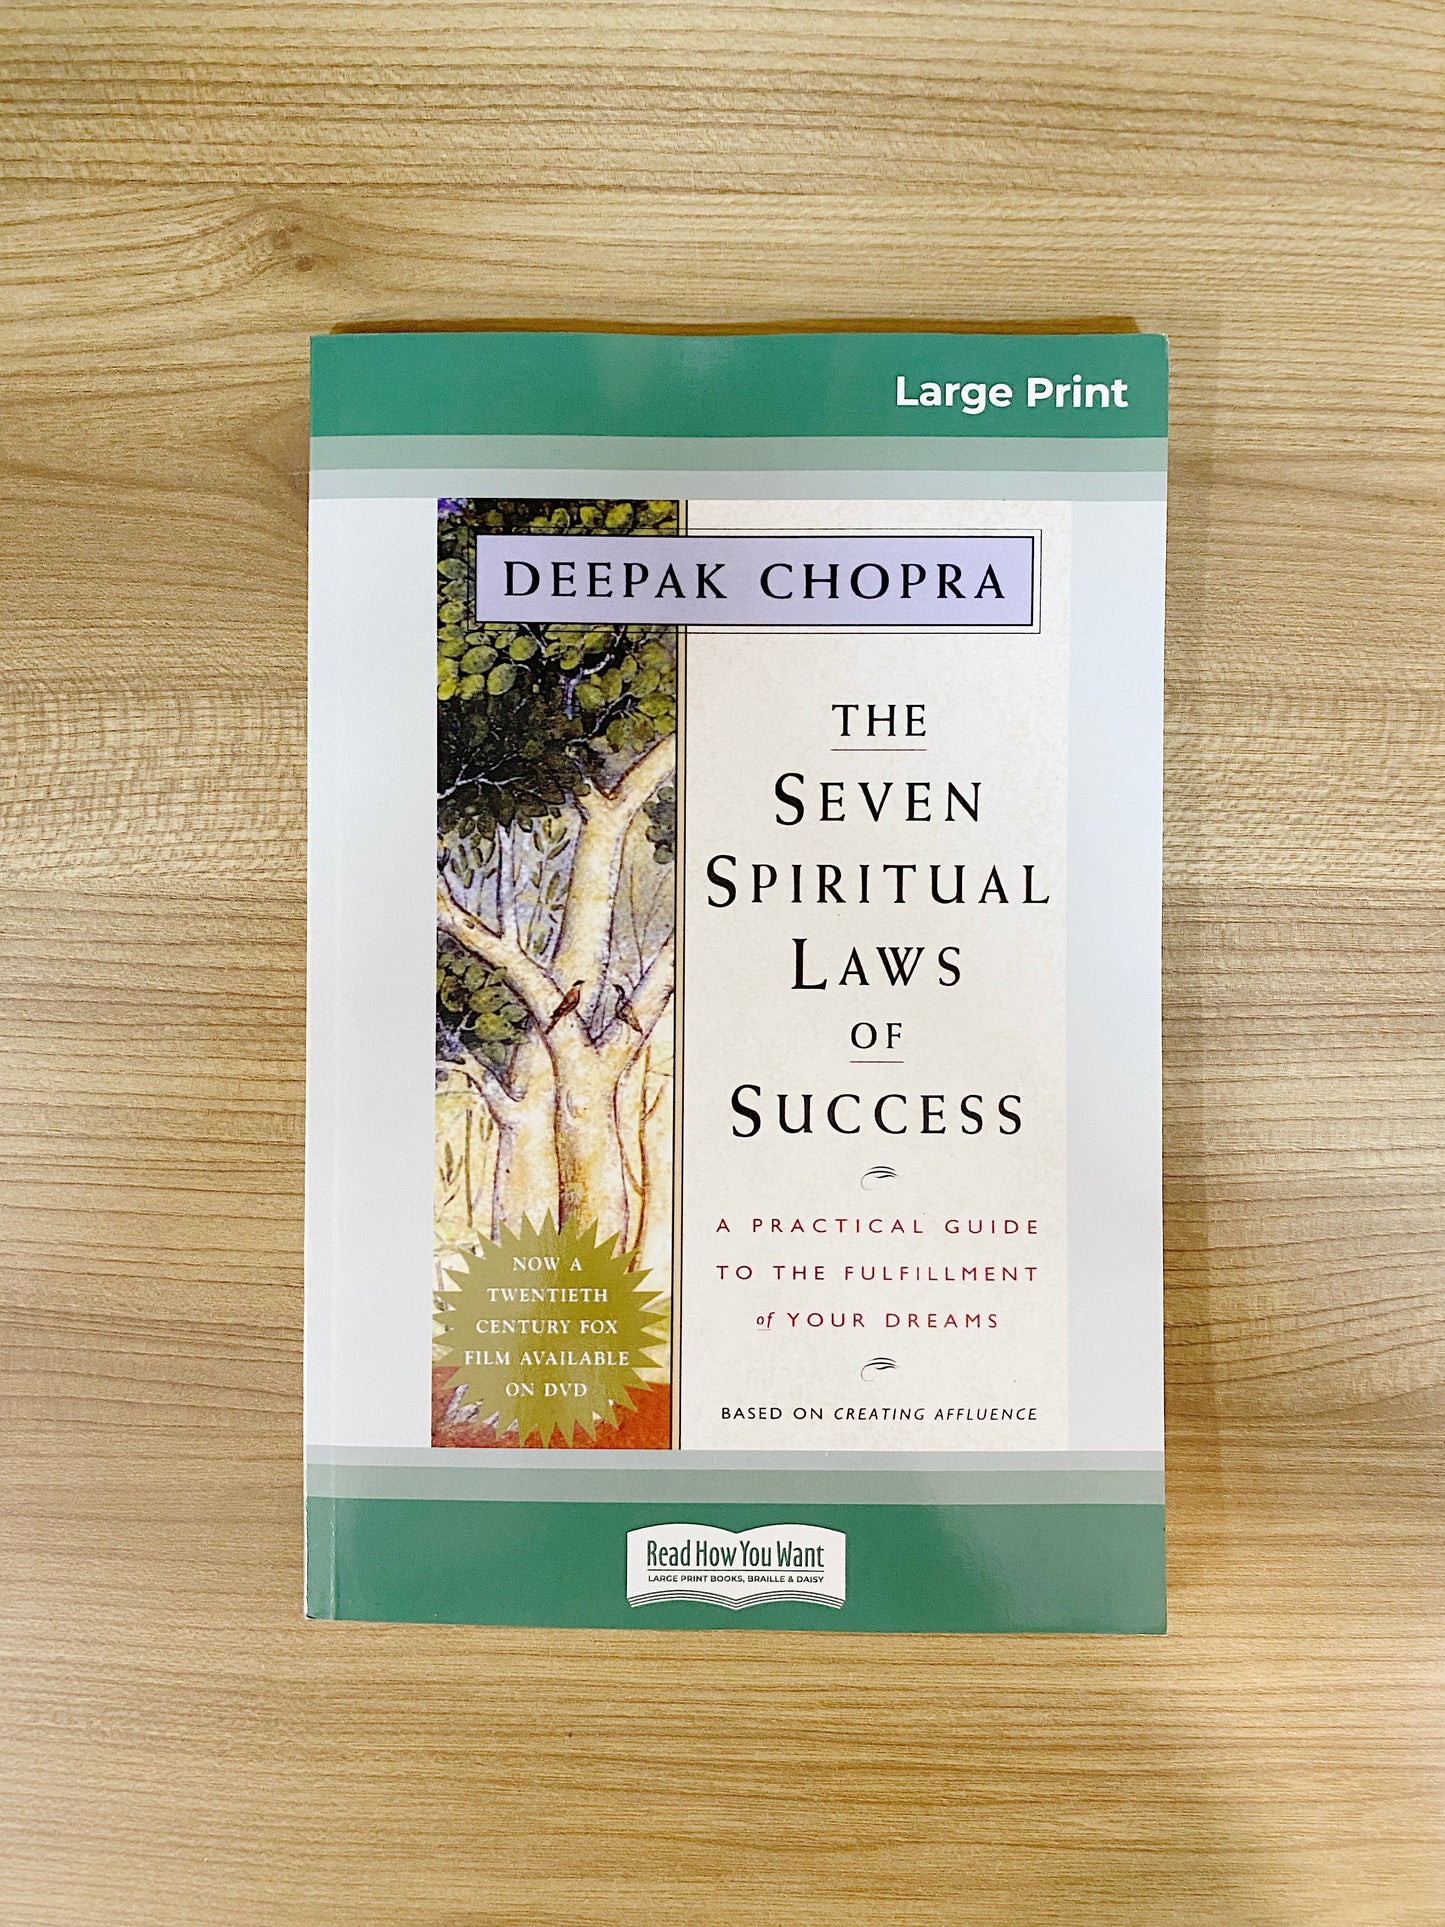 Deepak Chopra - The Seven Spiritual Laws of Success: A Practical Guide to the Fulfillment of Your Dreams